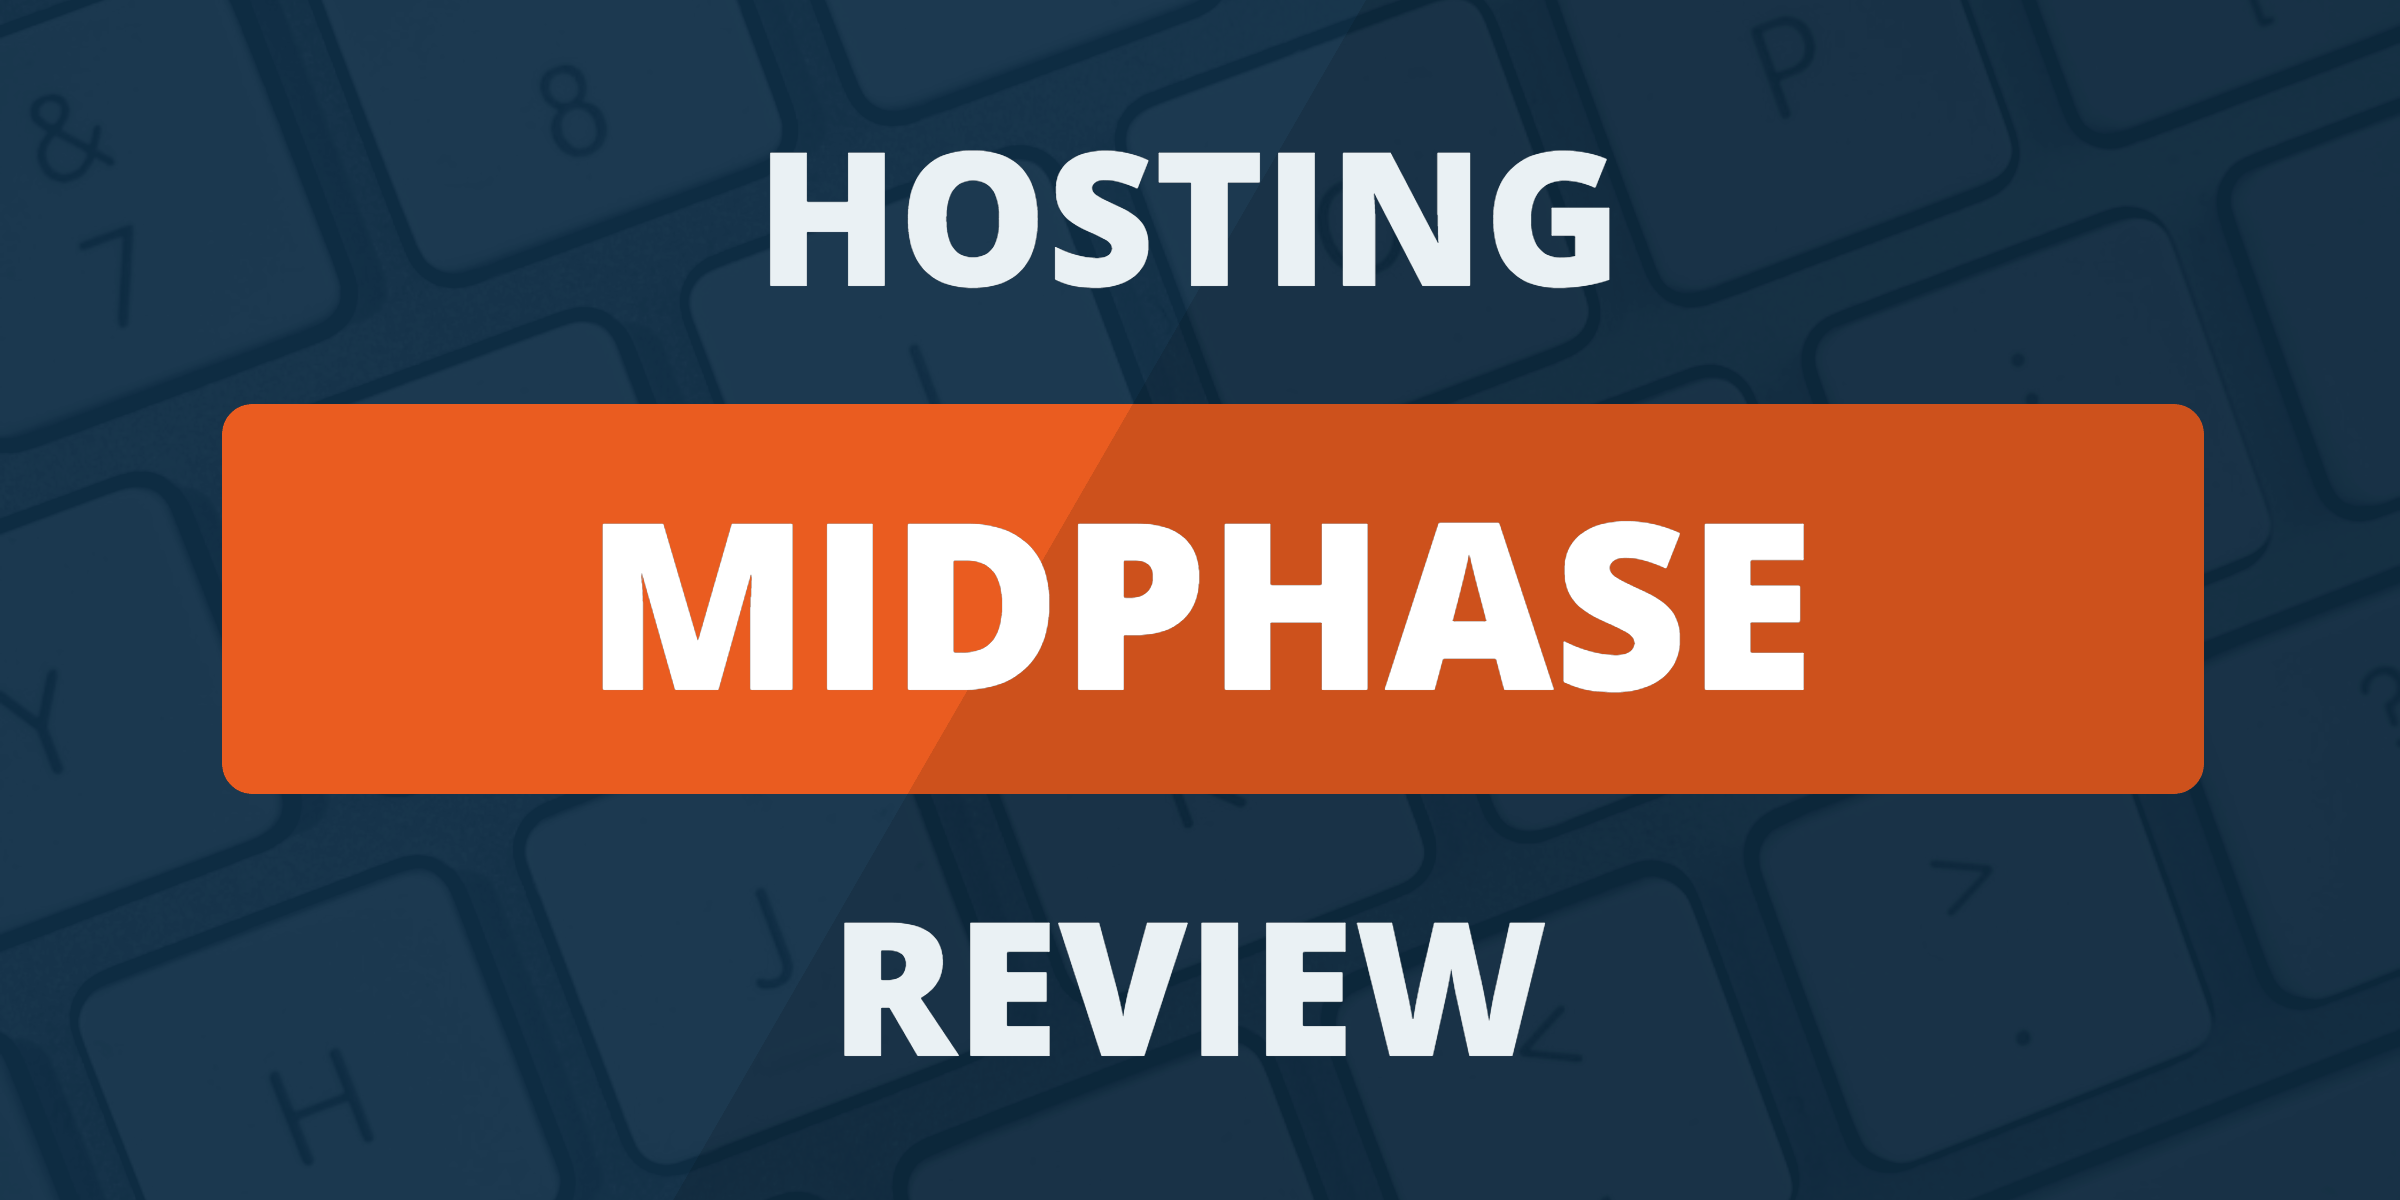 midphase-hosting-review